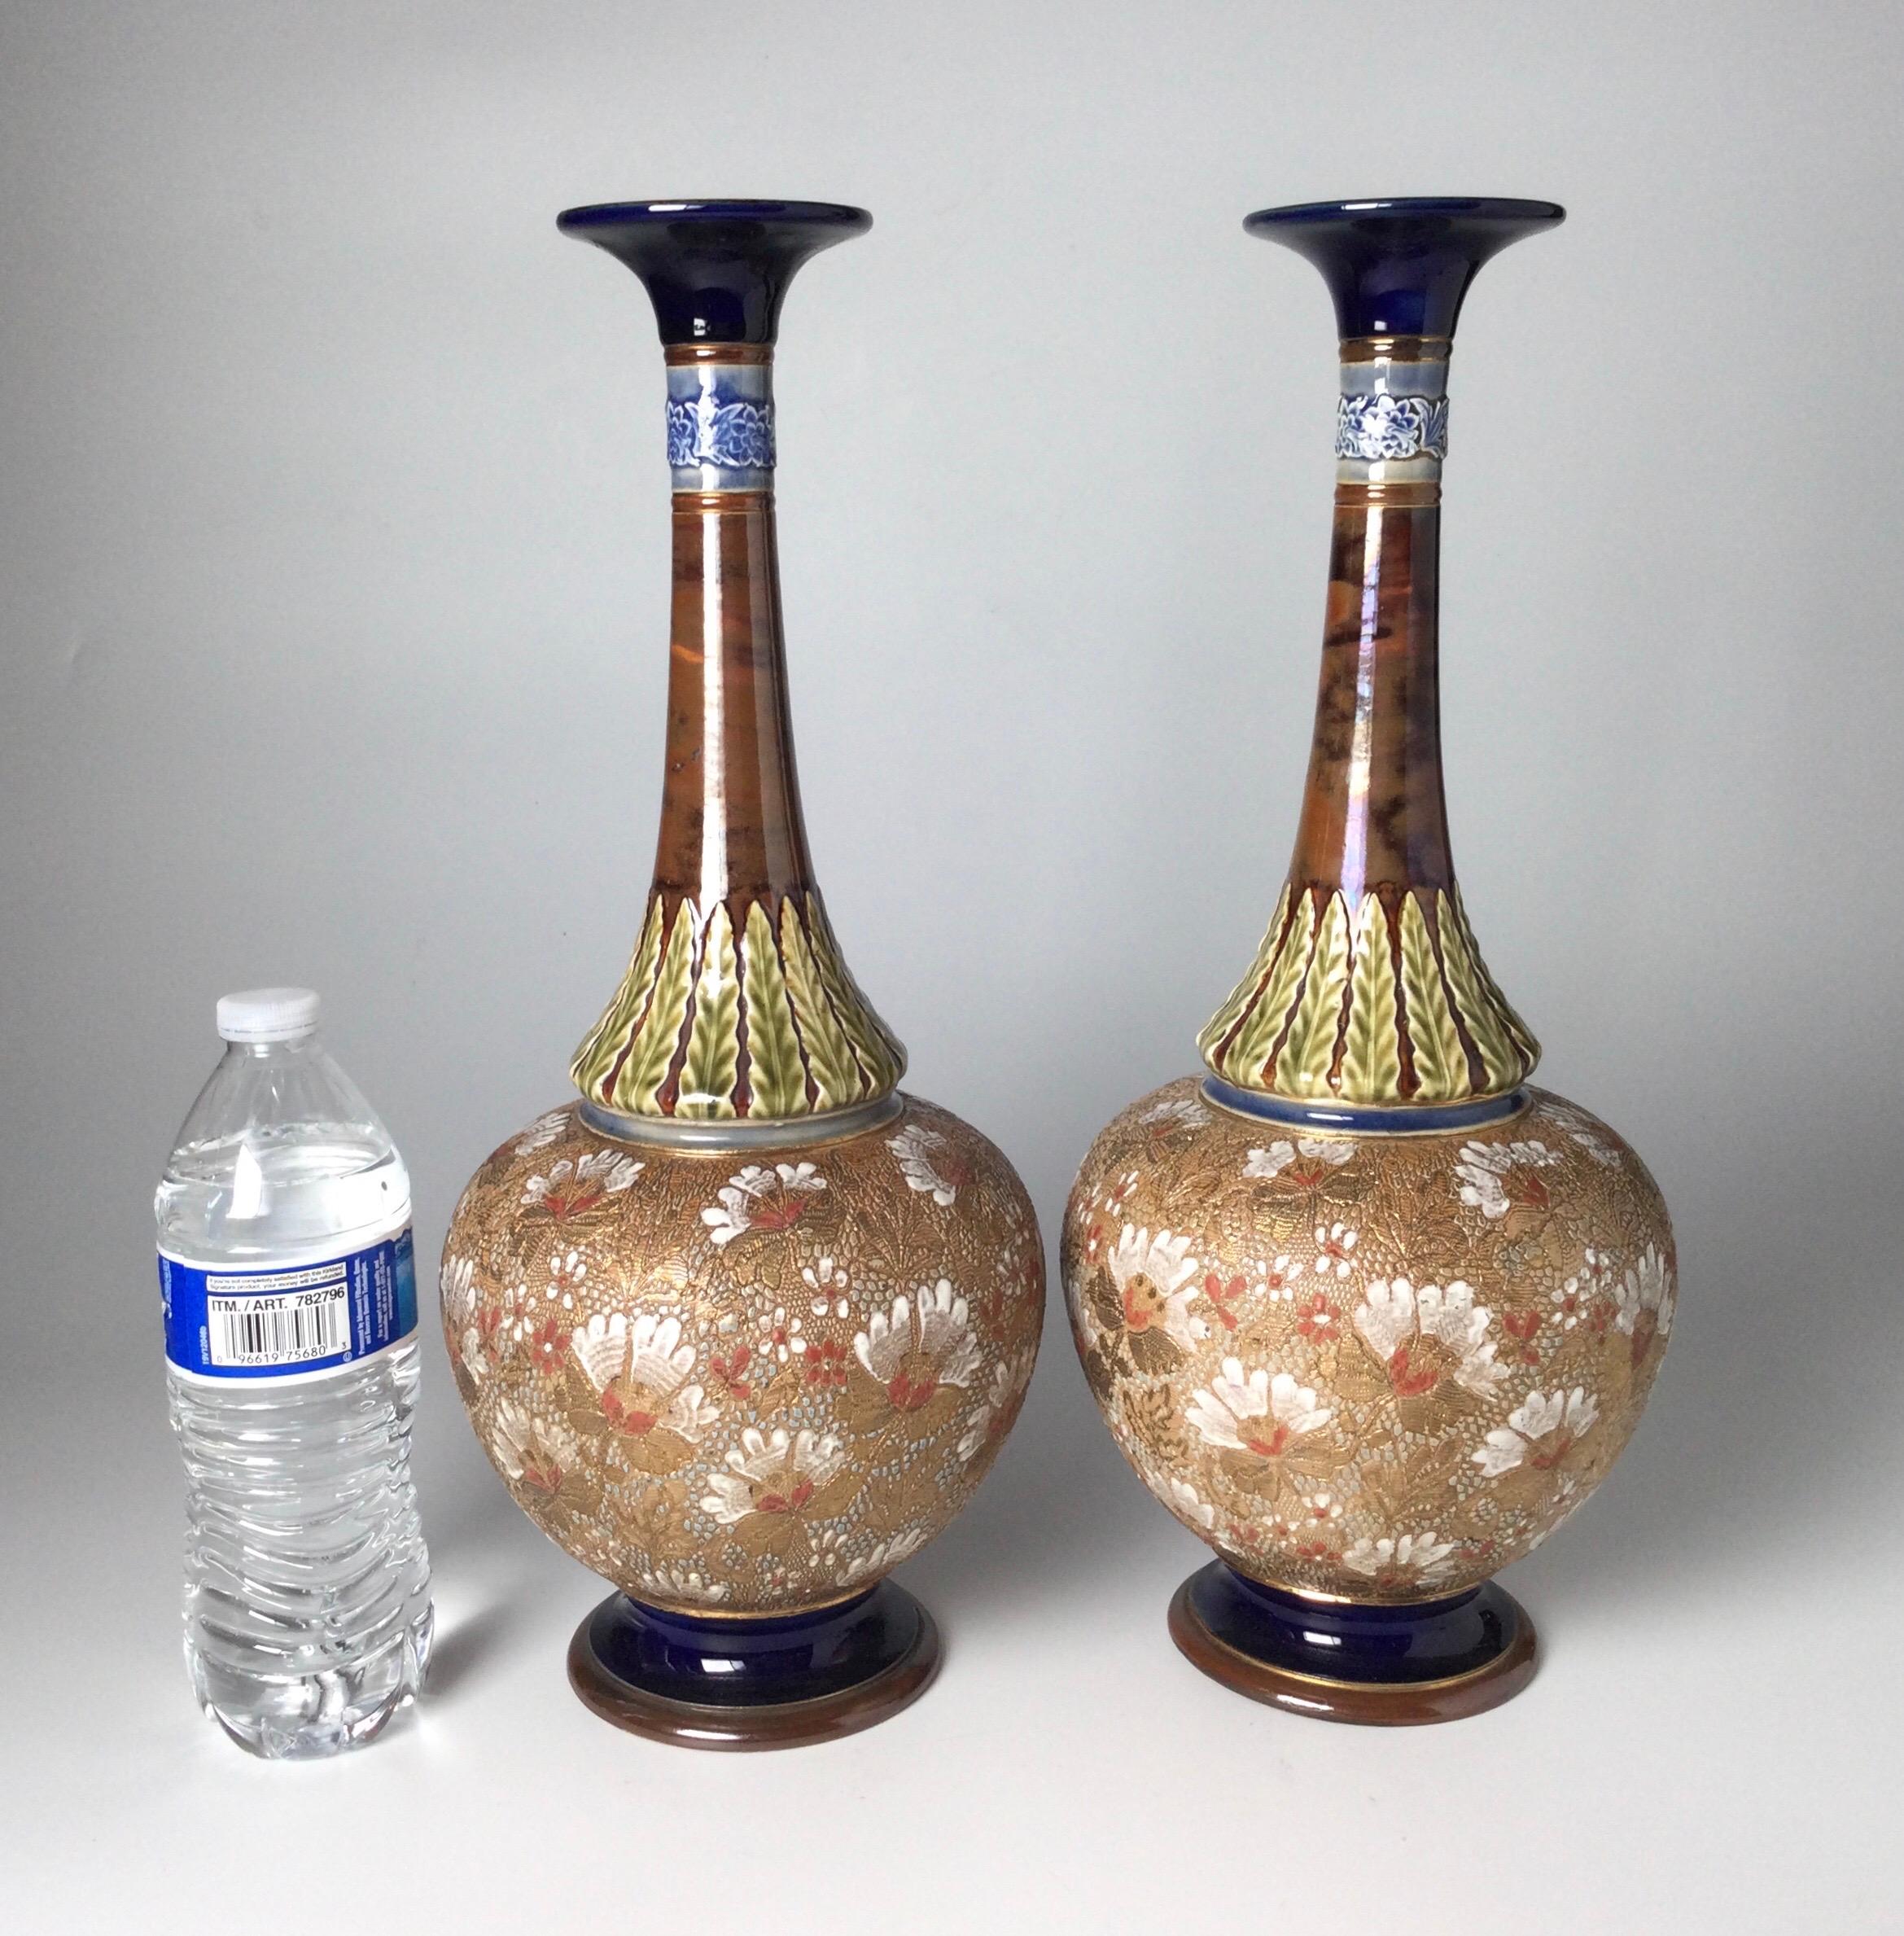 A pair of 16 inch tall Royal Doulton hand enameled art nouveau bases. The thin tapering necks with bulbous body with hand enameled decoration with cobalt blue glaze accents. Marked on bottoms with the makers mark, Circa 1900.